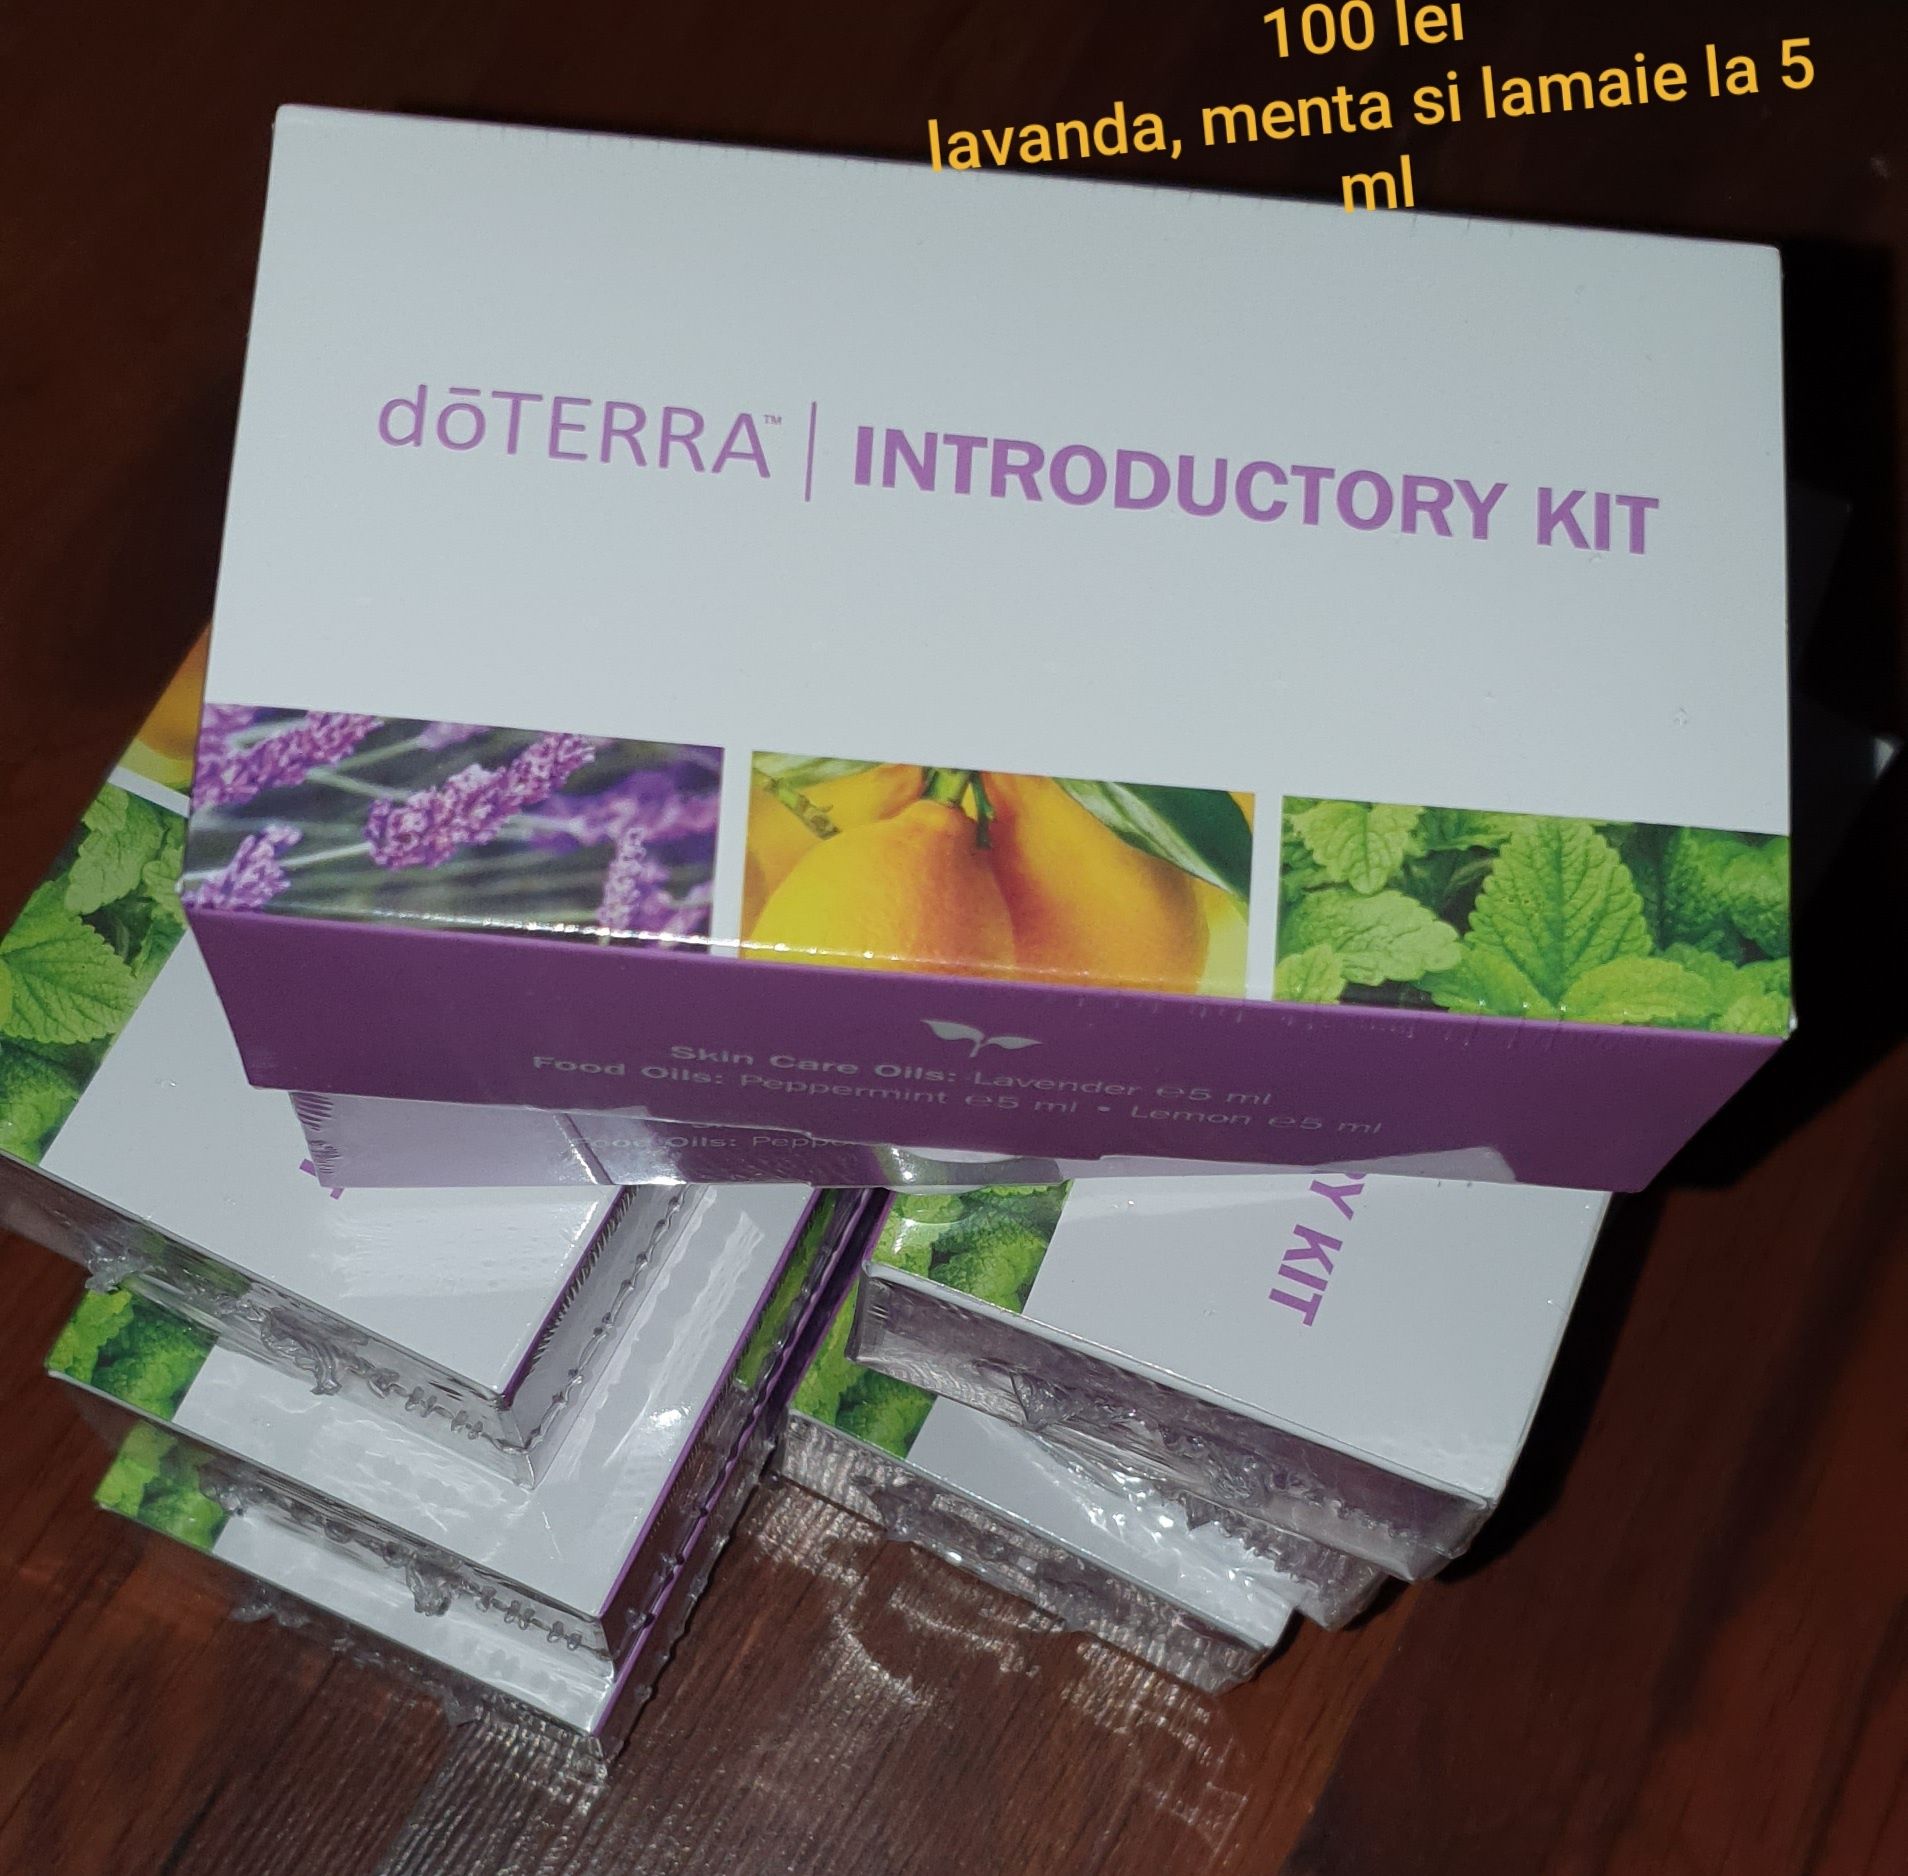 Introductory kit doTERRA